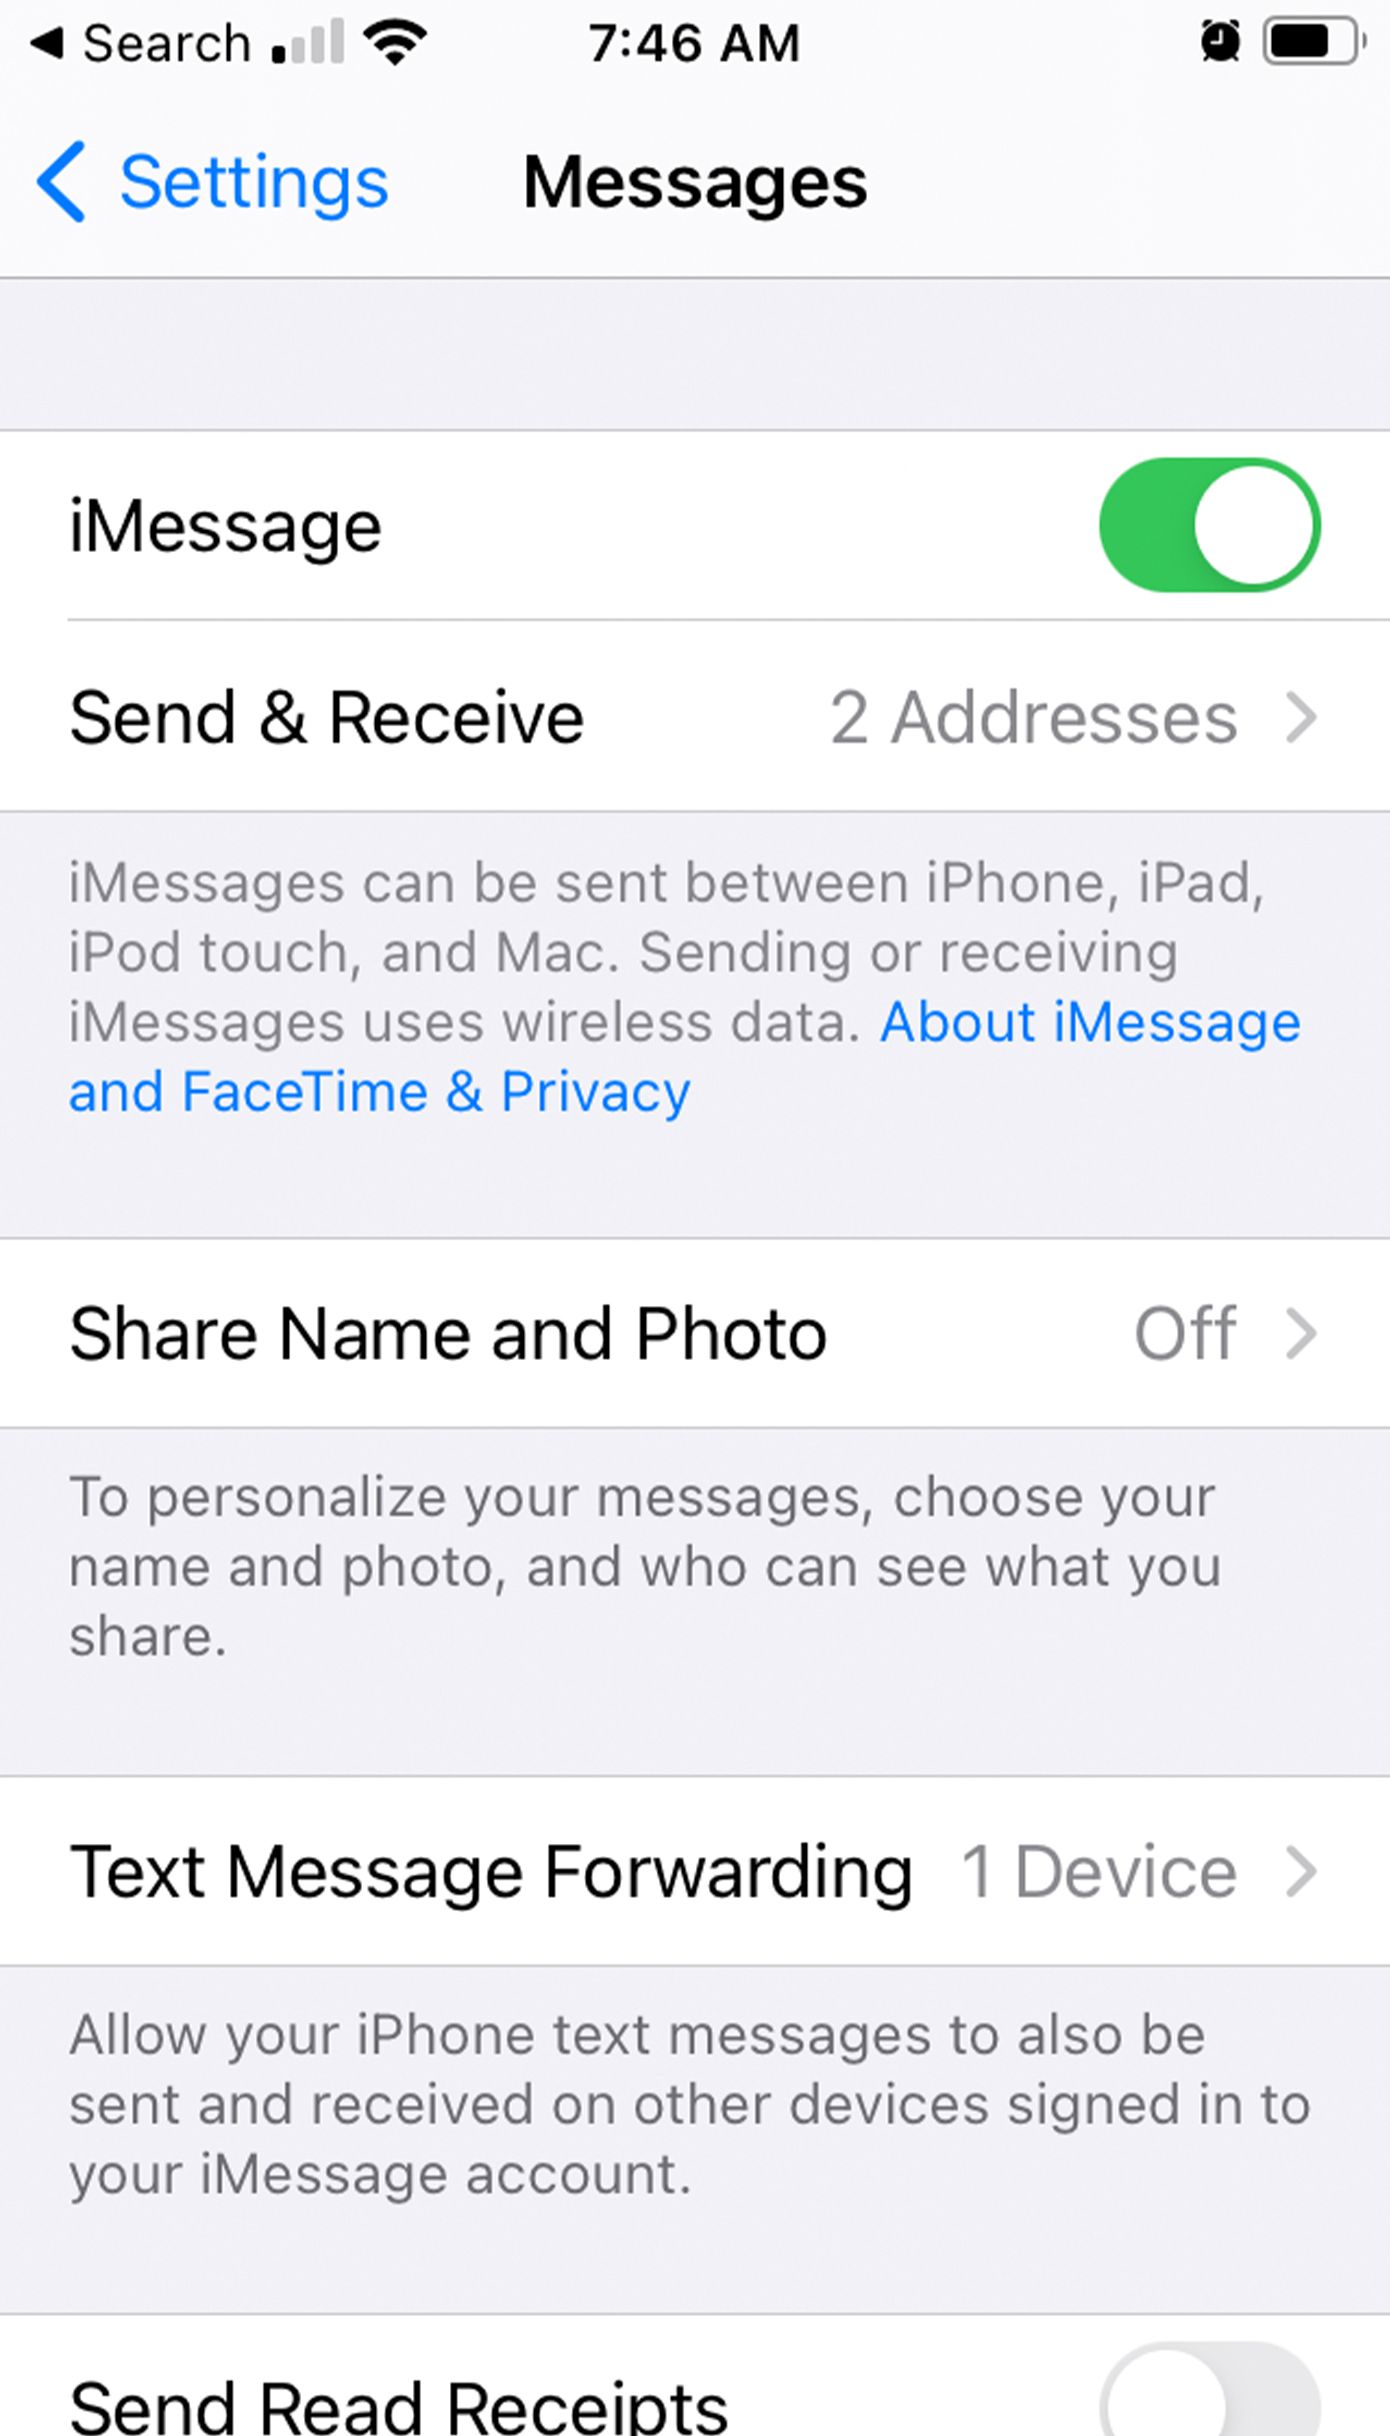 Turn on Text Message Forwarding on iPhone